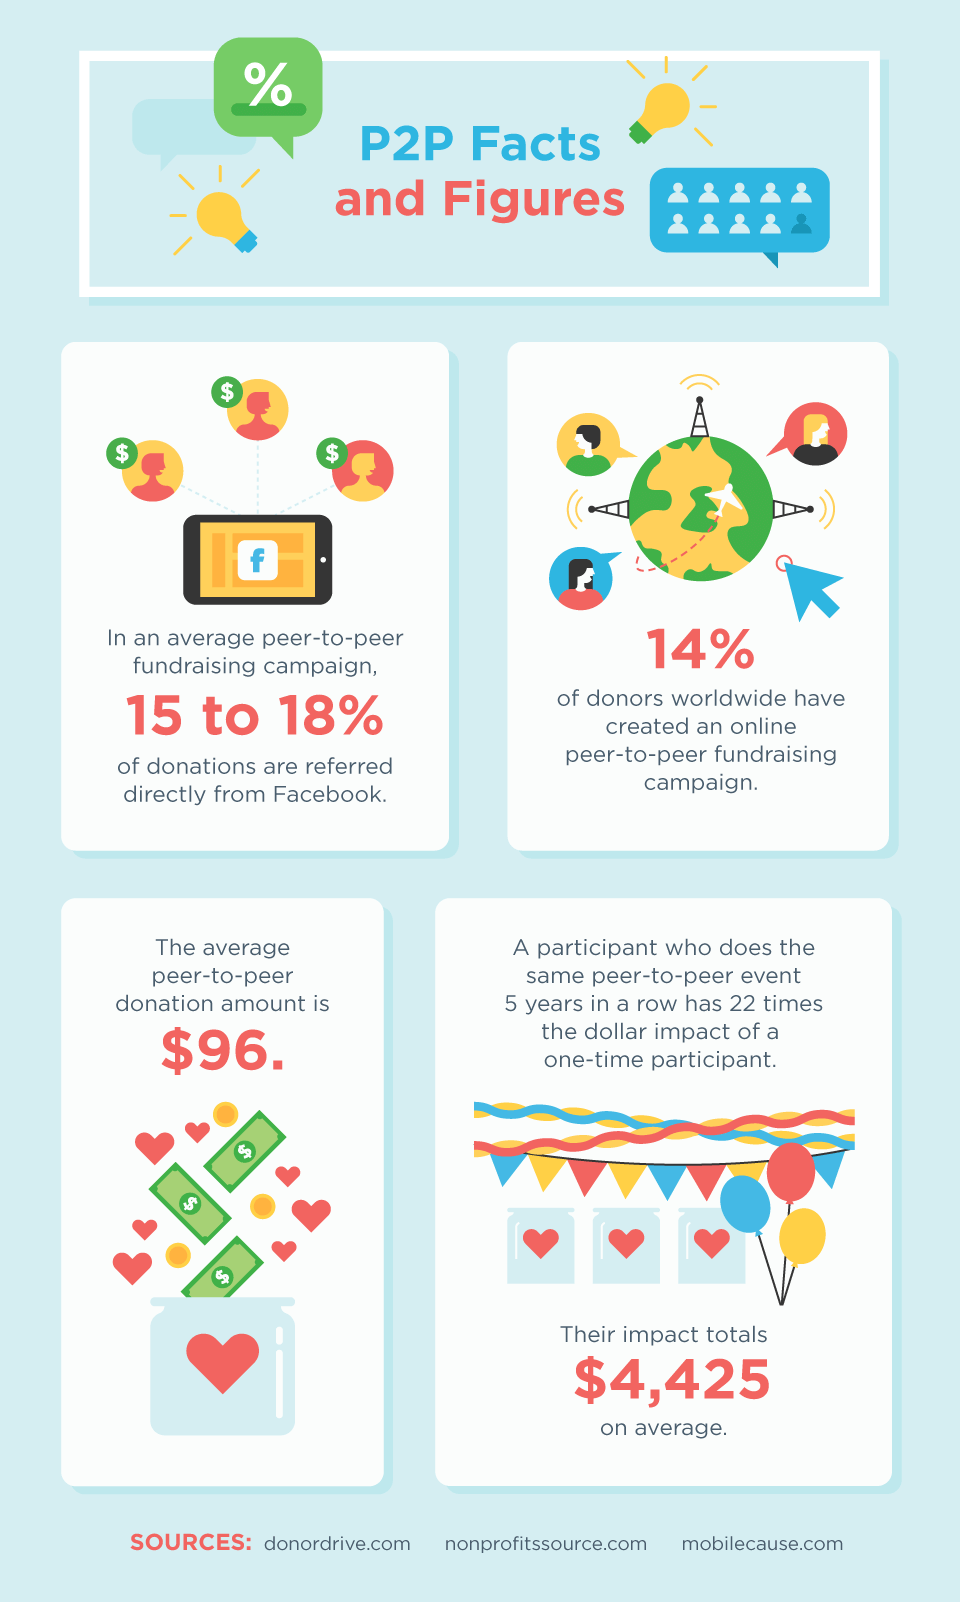 Infographic for nonprofits providing facts figures and statistics about peer-to-peer (P2P) fundraising campaigns